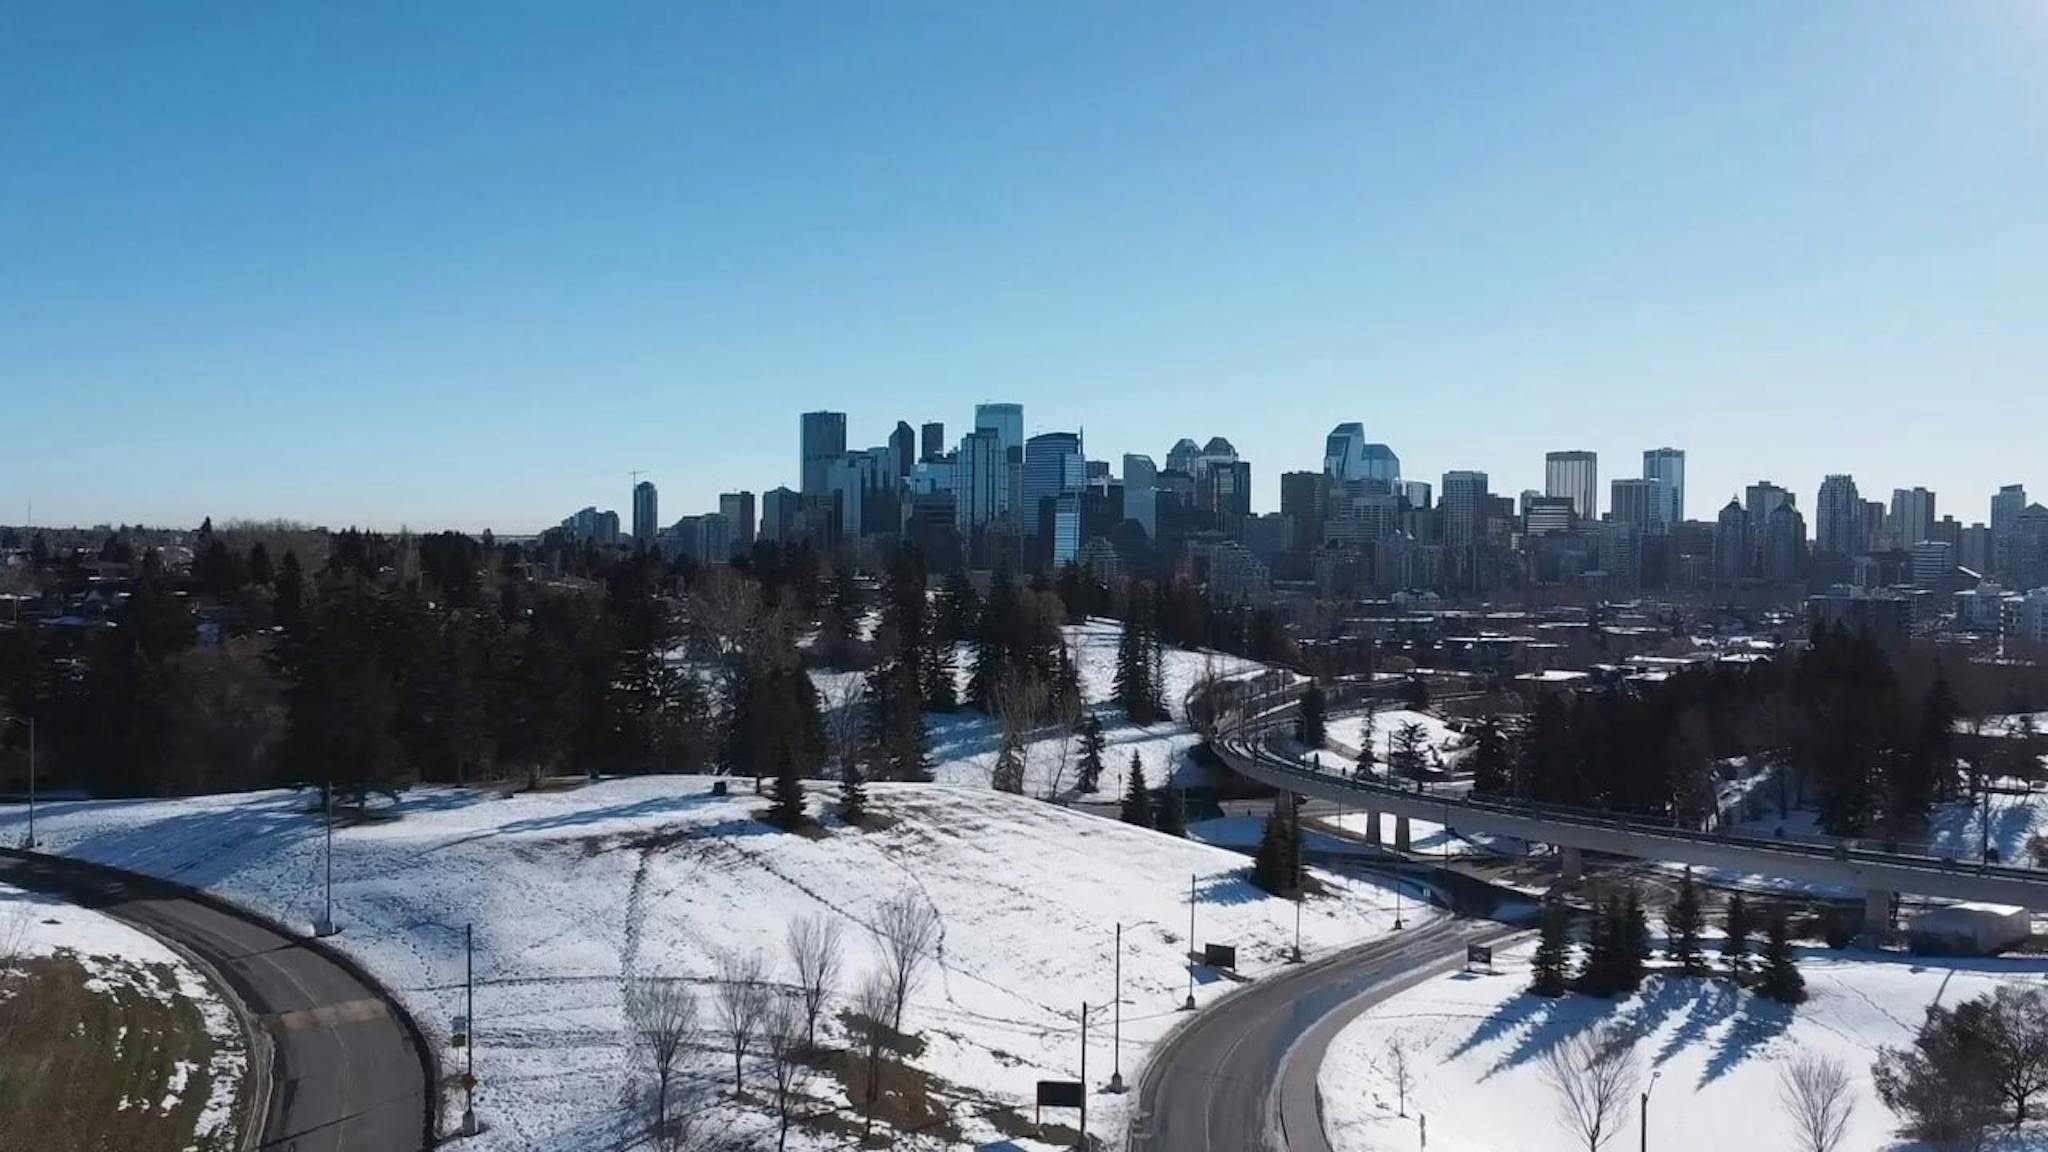 Calgary skyline from an aerial view during the winter.